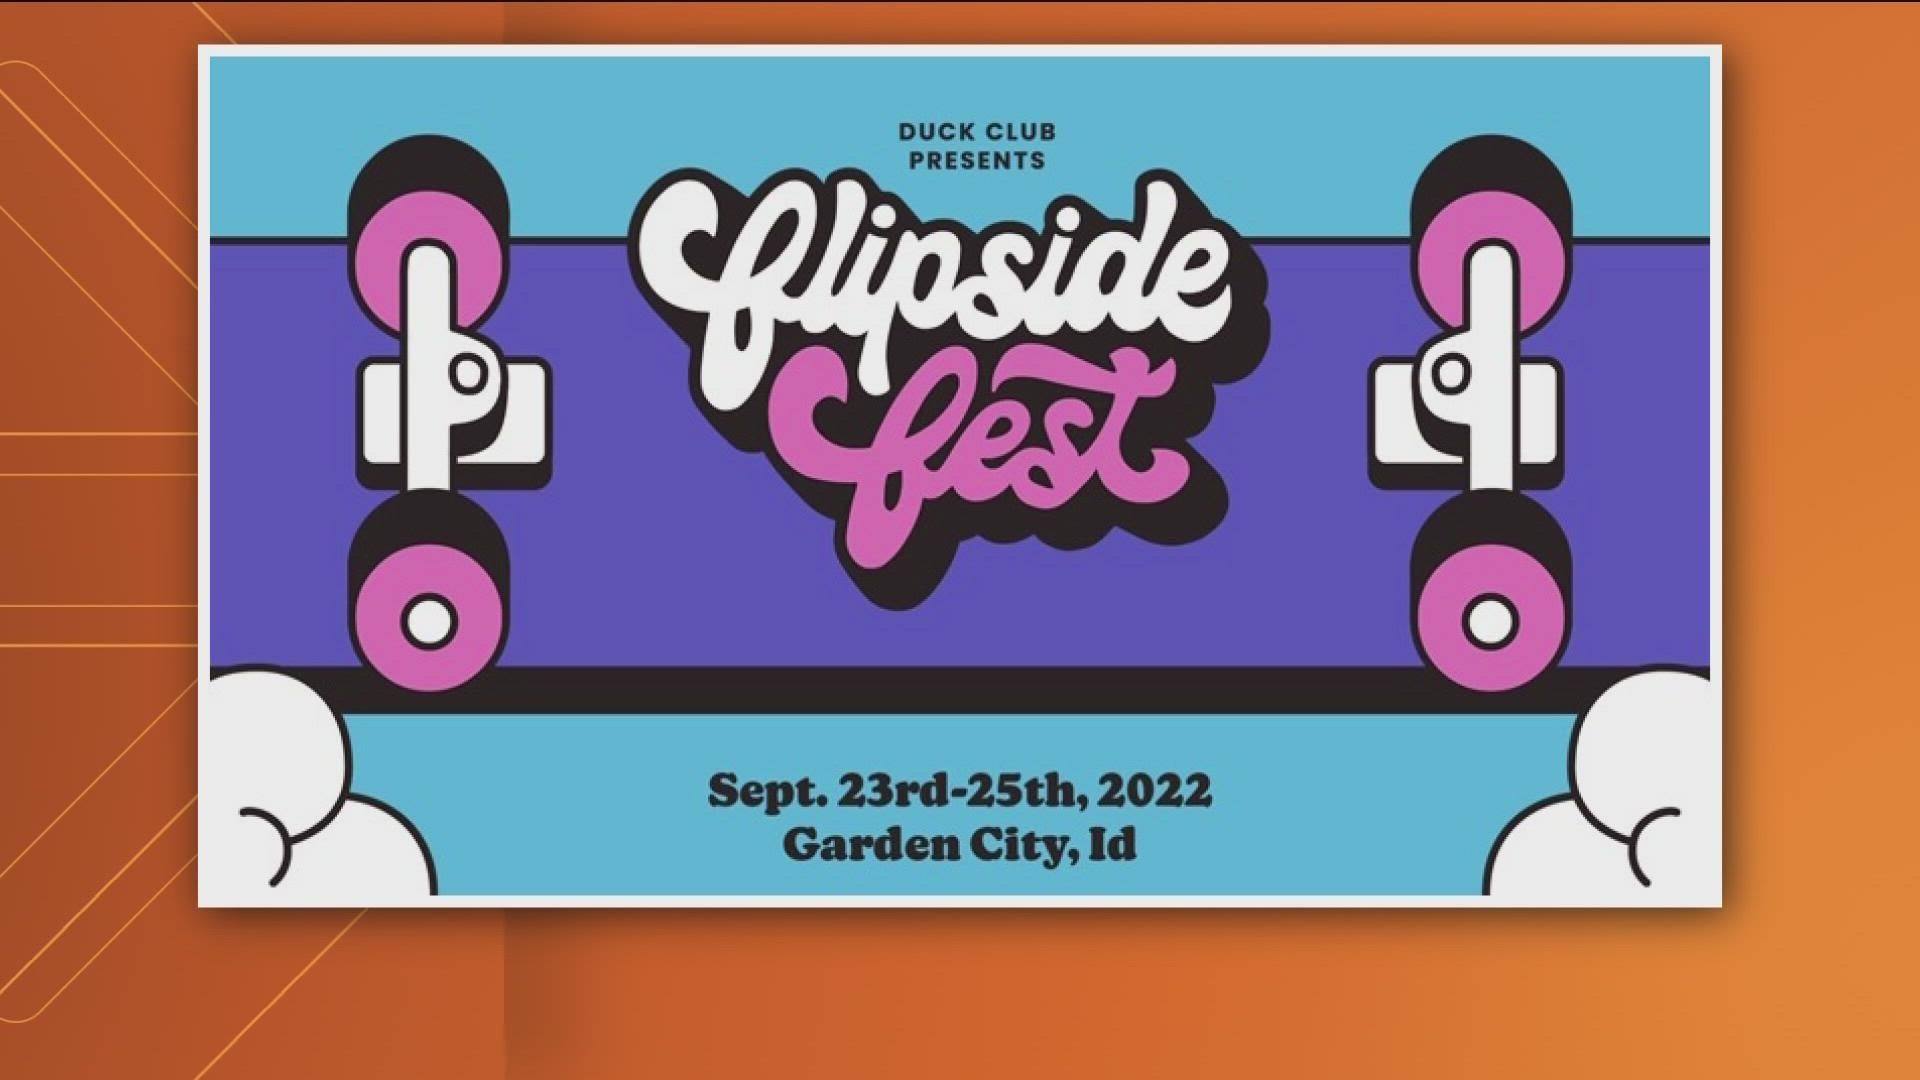 Flipside Fest is a new neighborhood music and mural festival from the creators of the Treefort Music Fest that will be held this fall.